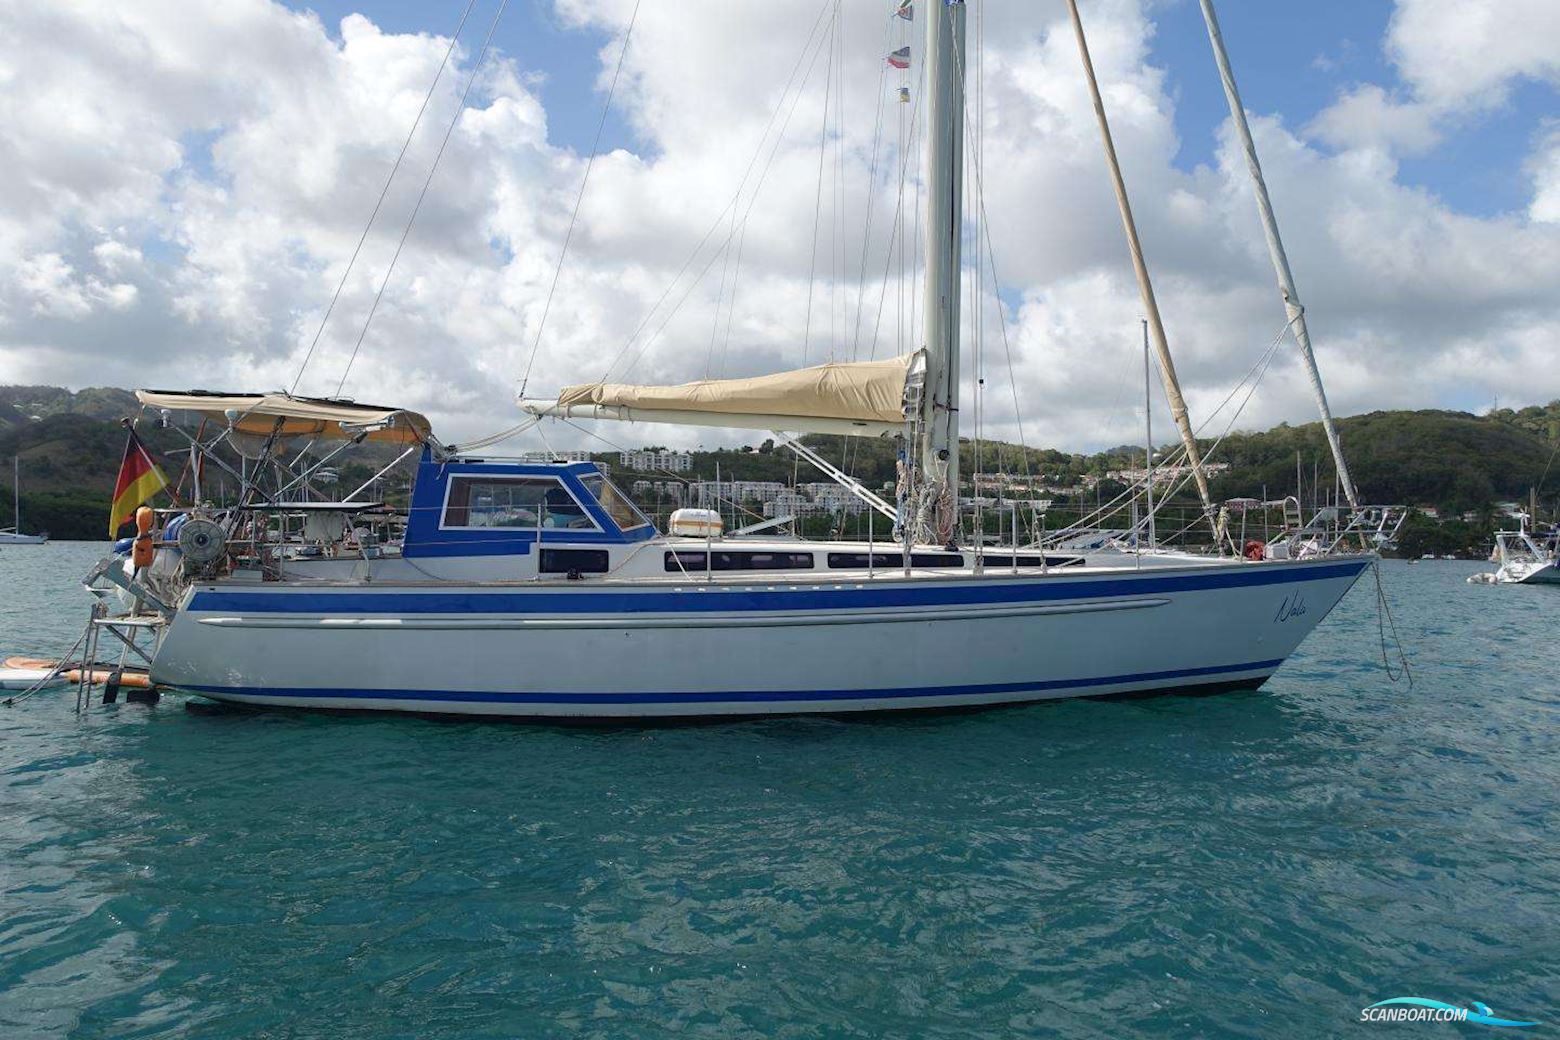 Glacer Glacer 44 Sailing boat 1991, with Mercedes 75 engine, Martinique